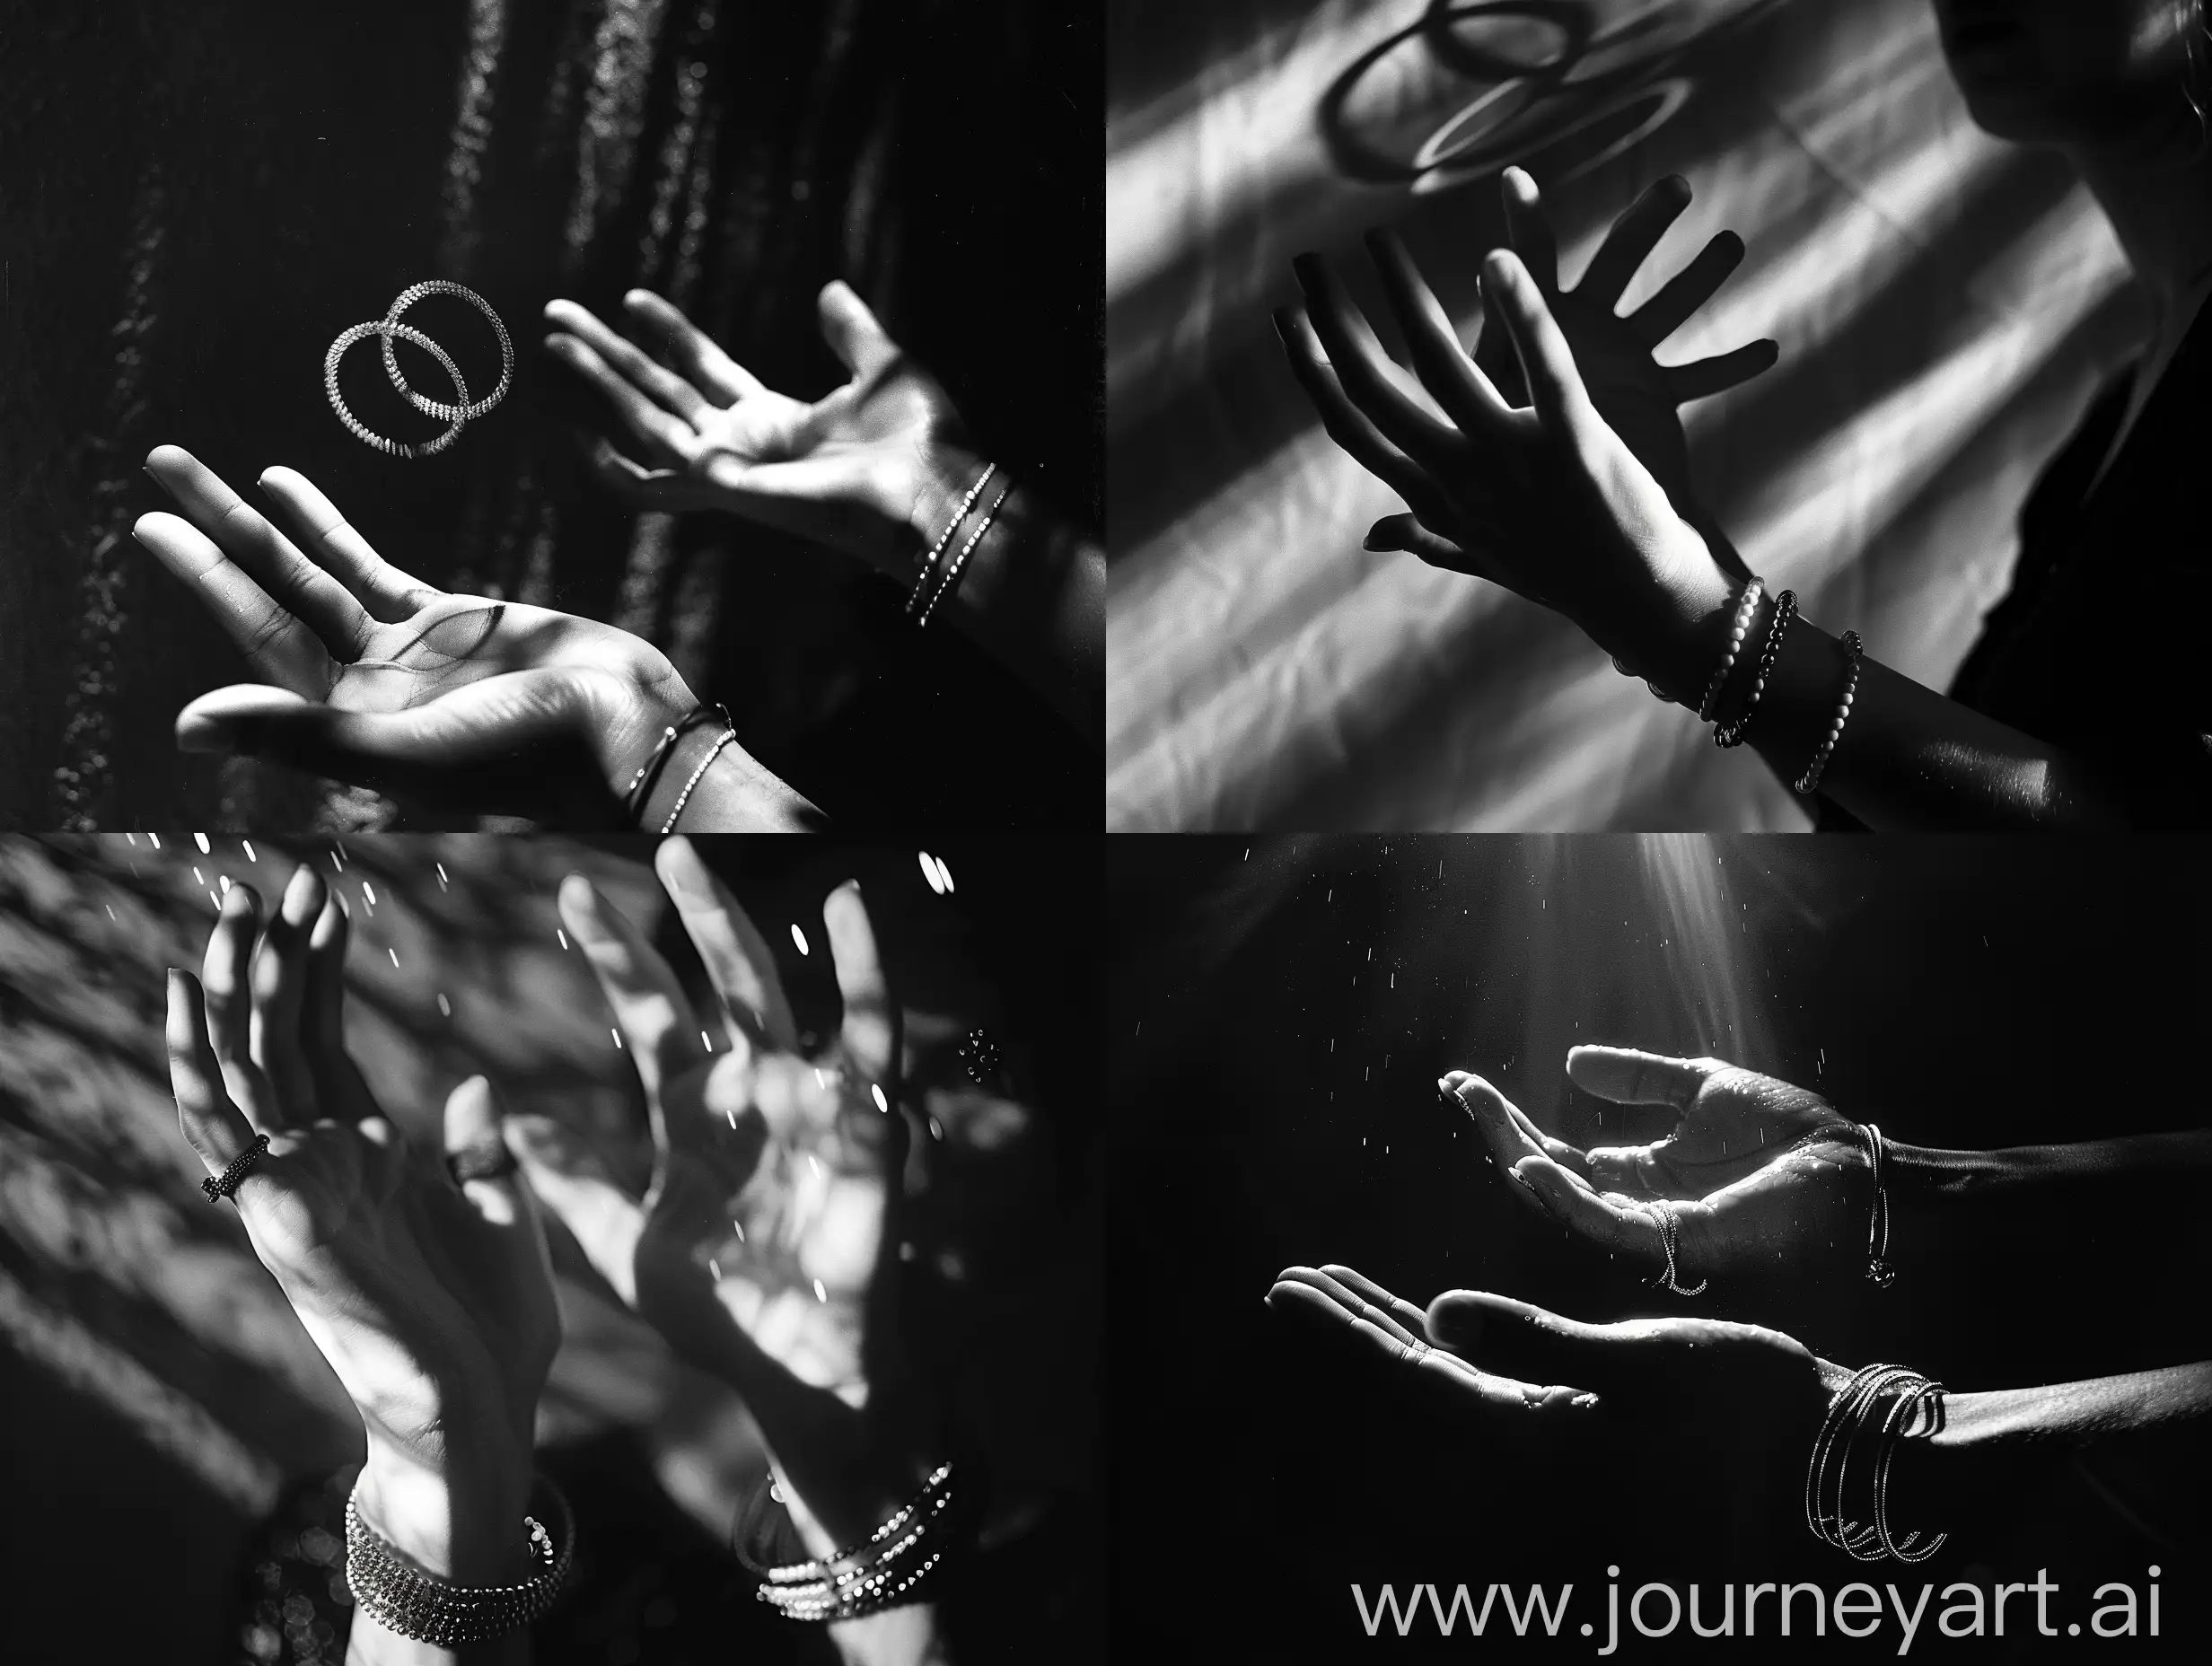 Ethereal-Dance-Interlaced-Shadows-and-Floating-Bracelets-in-Monochrome